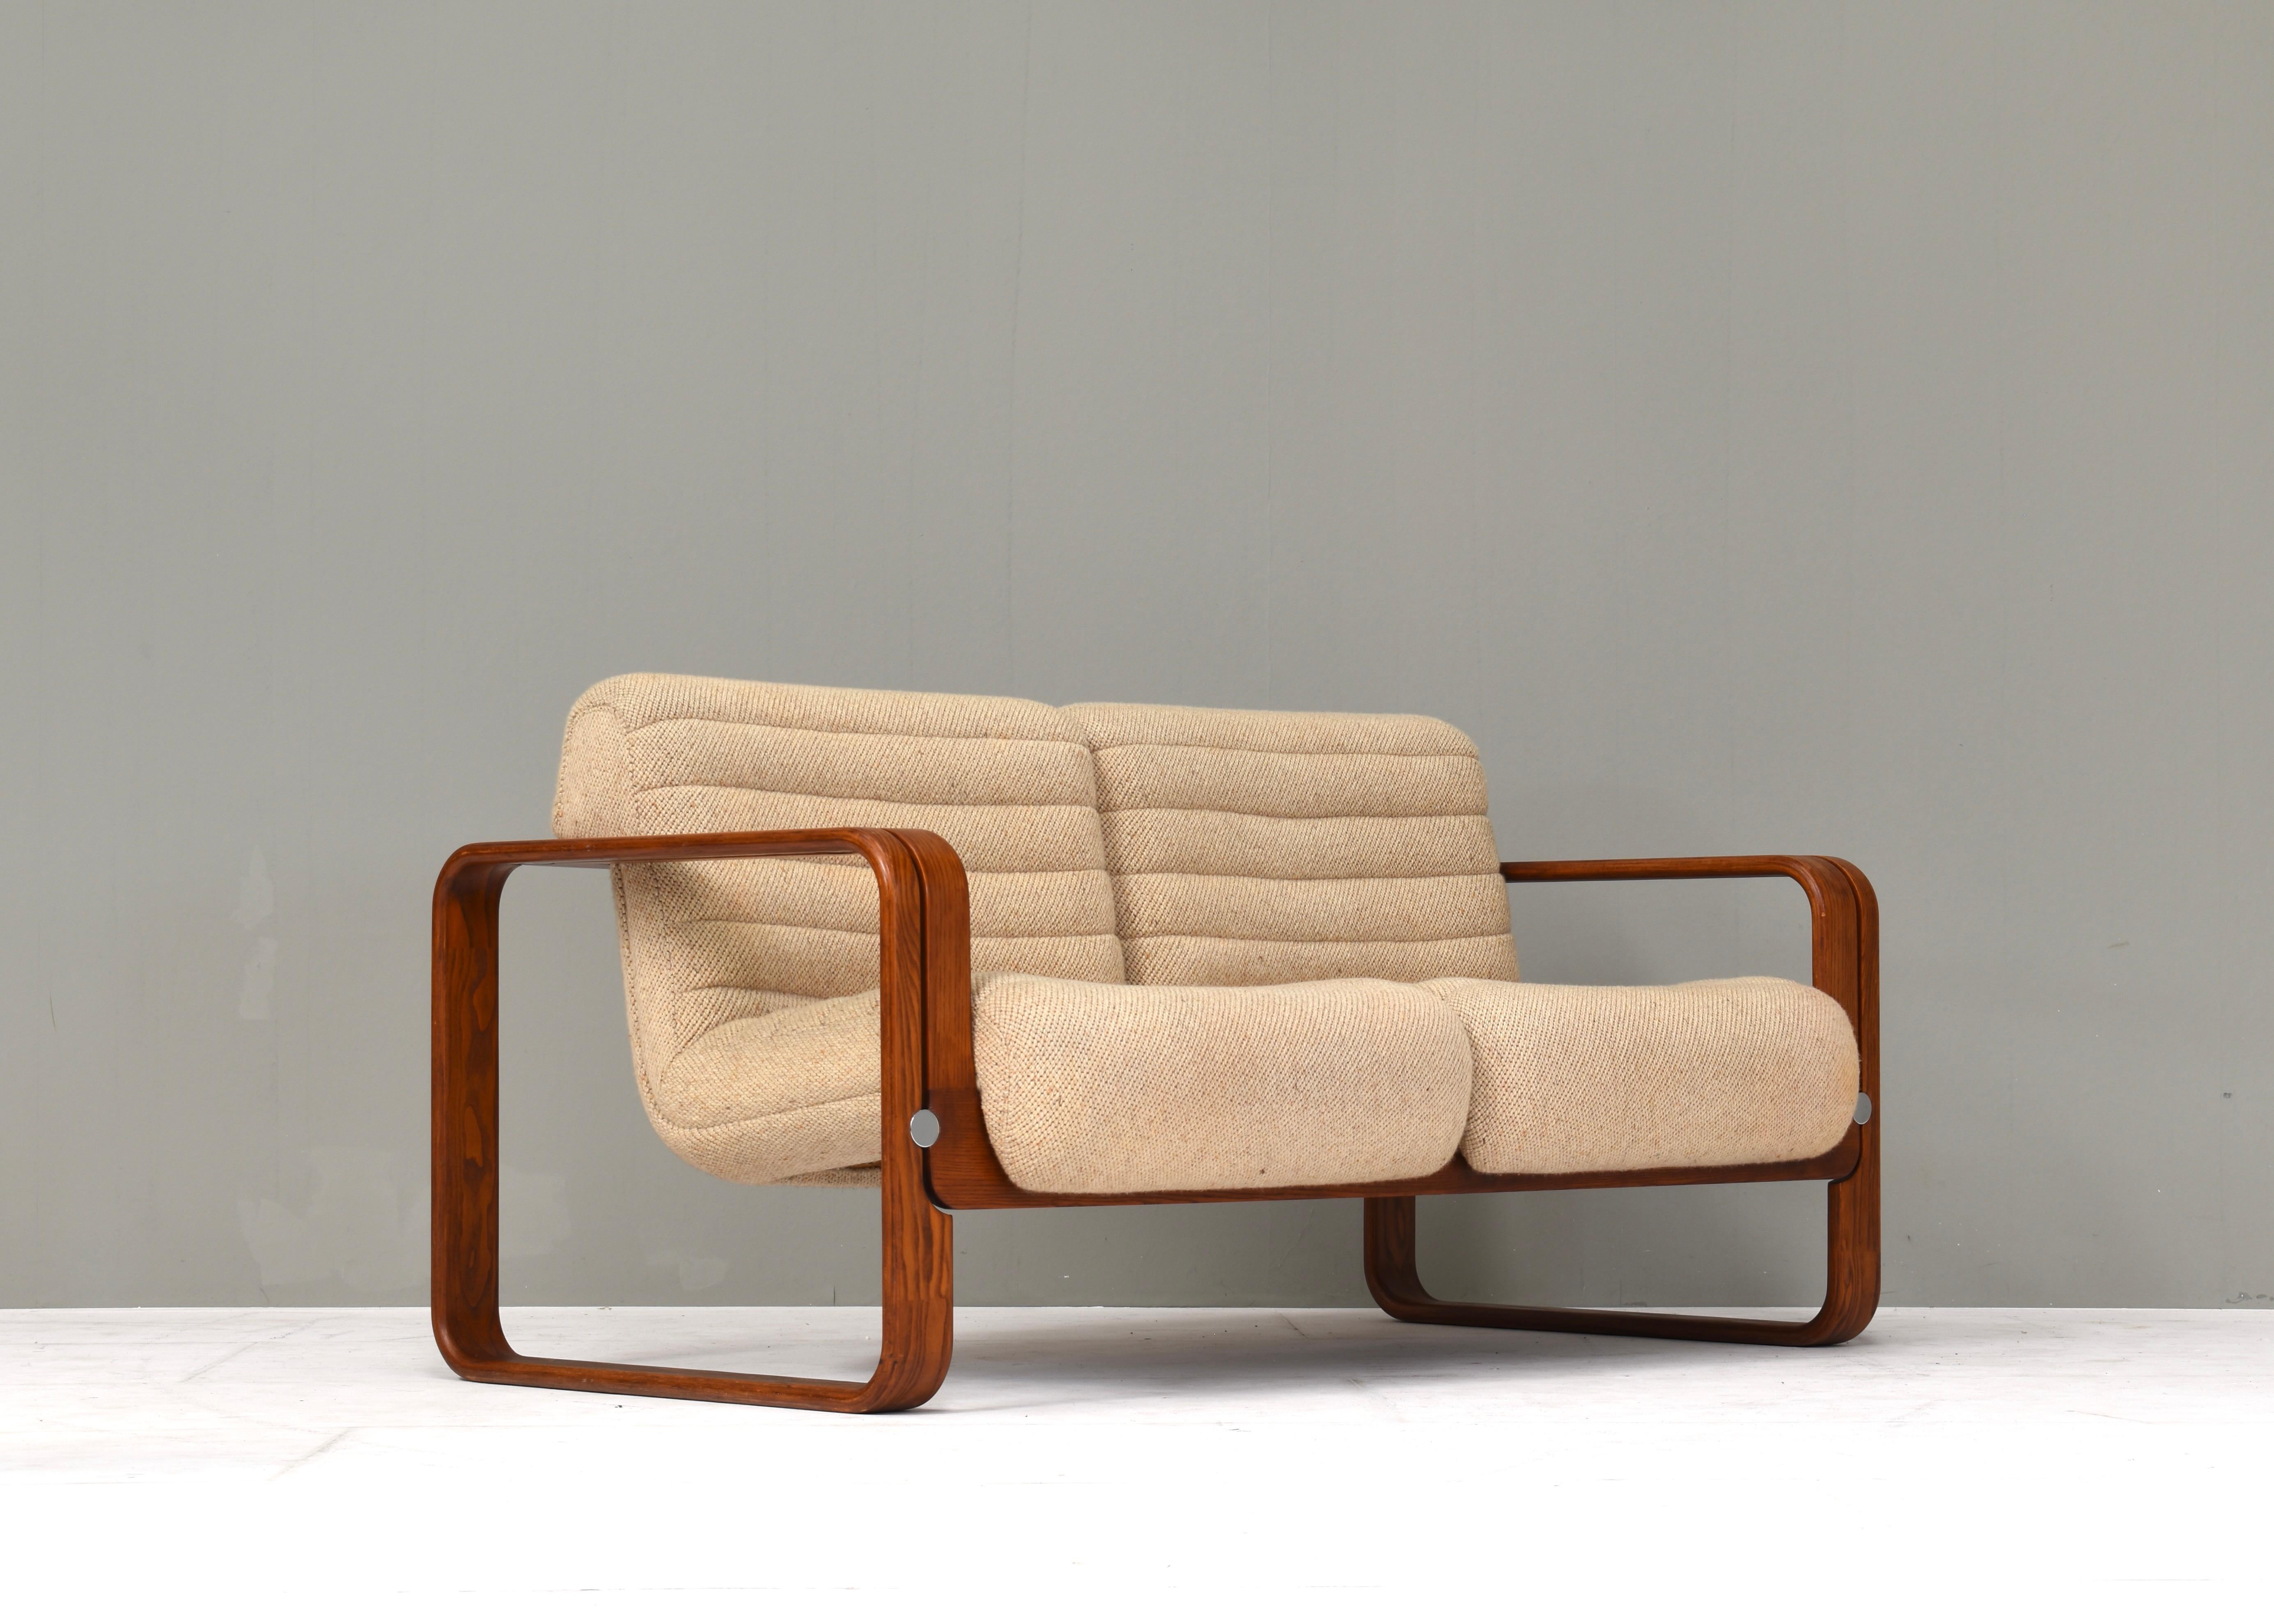 Sculptural two-seat sofa by Jan Bocan in stained bentwood and original jute fabric – Czech Republic, circa 1970.
Designer: Jan Bocan
Manufacturer: probably Thonet or Ton
Country: Czech Republic
Model: two seat sofa
Color: Beige
Material: Jute /